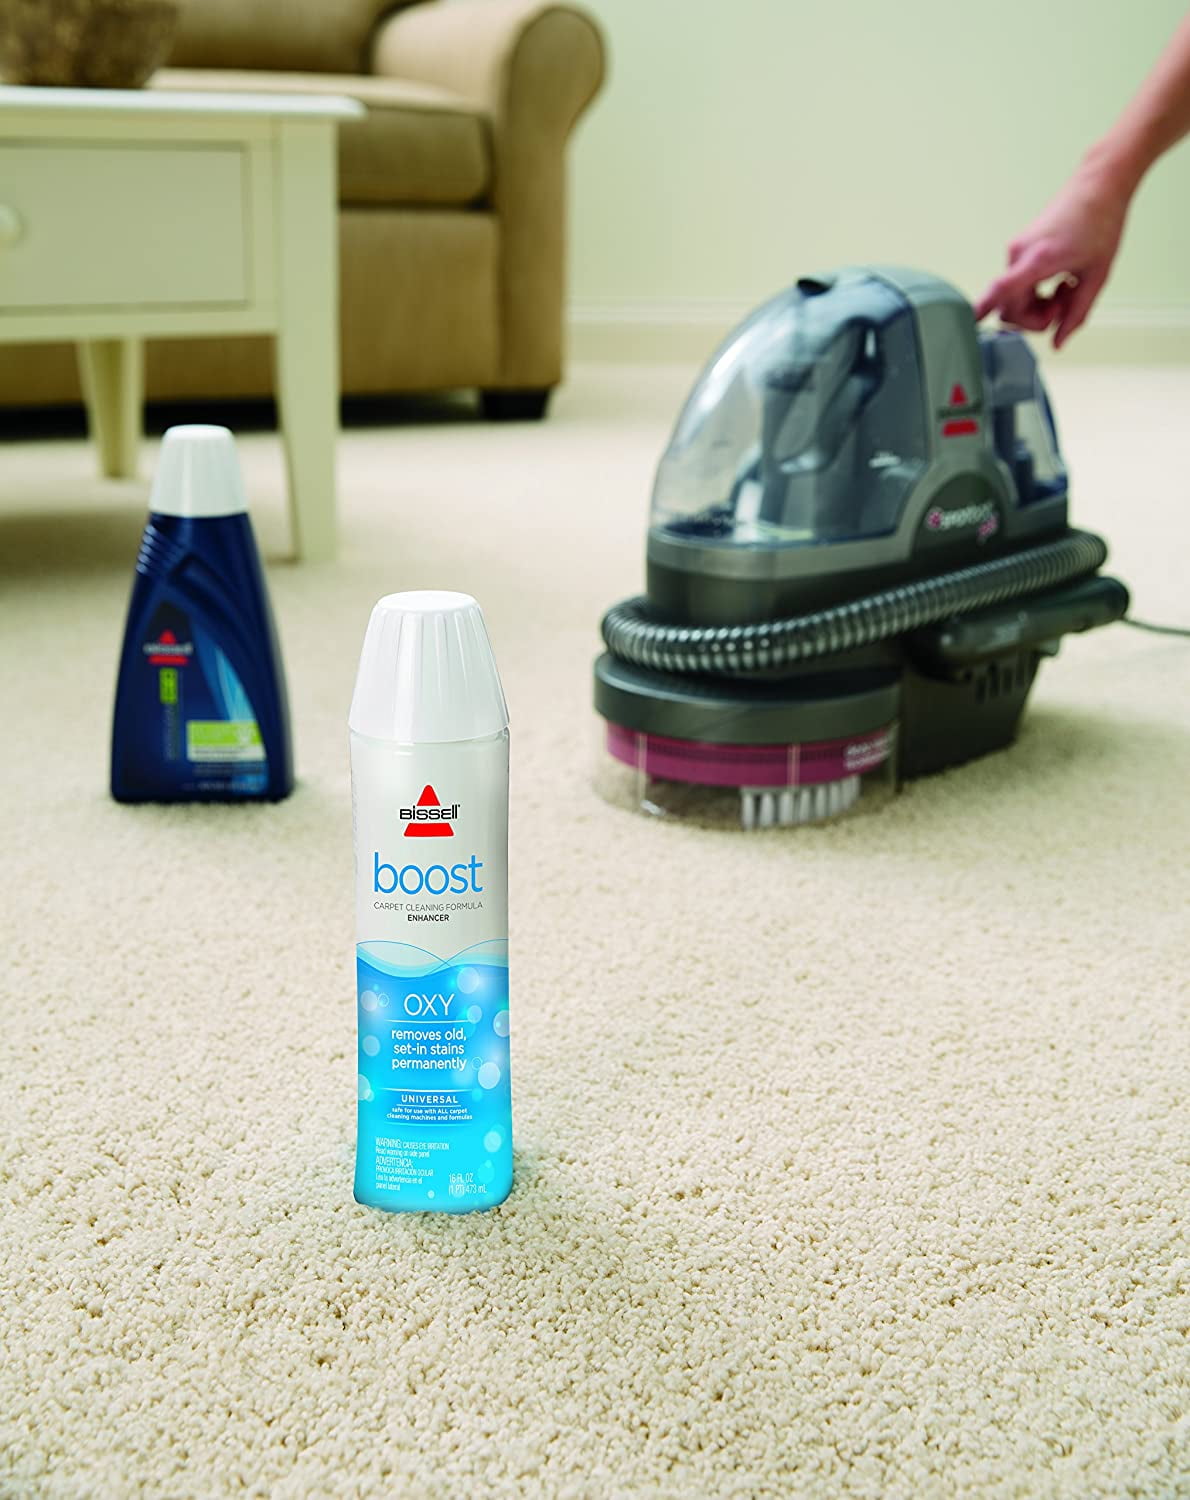 BISSELL Oxy Boost Carpet Cleaning Formula Enhancer 